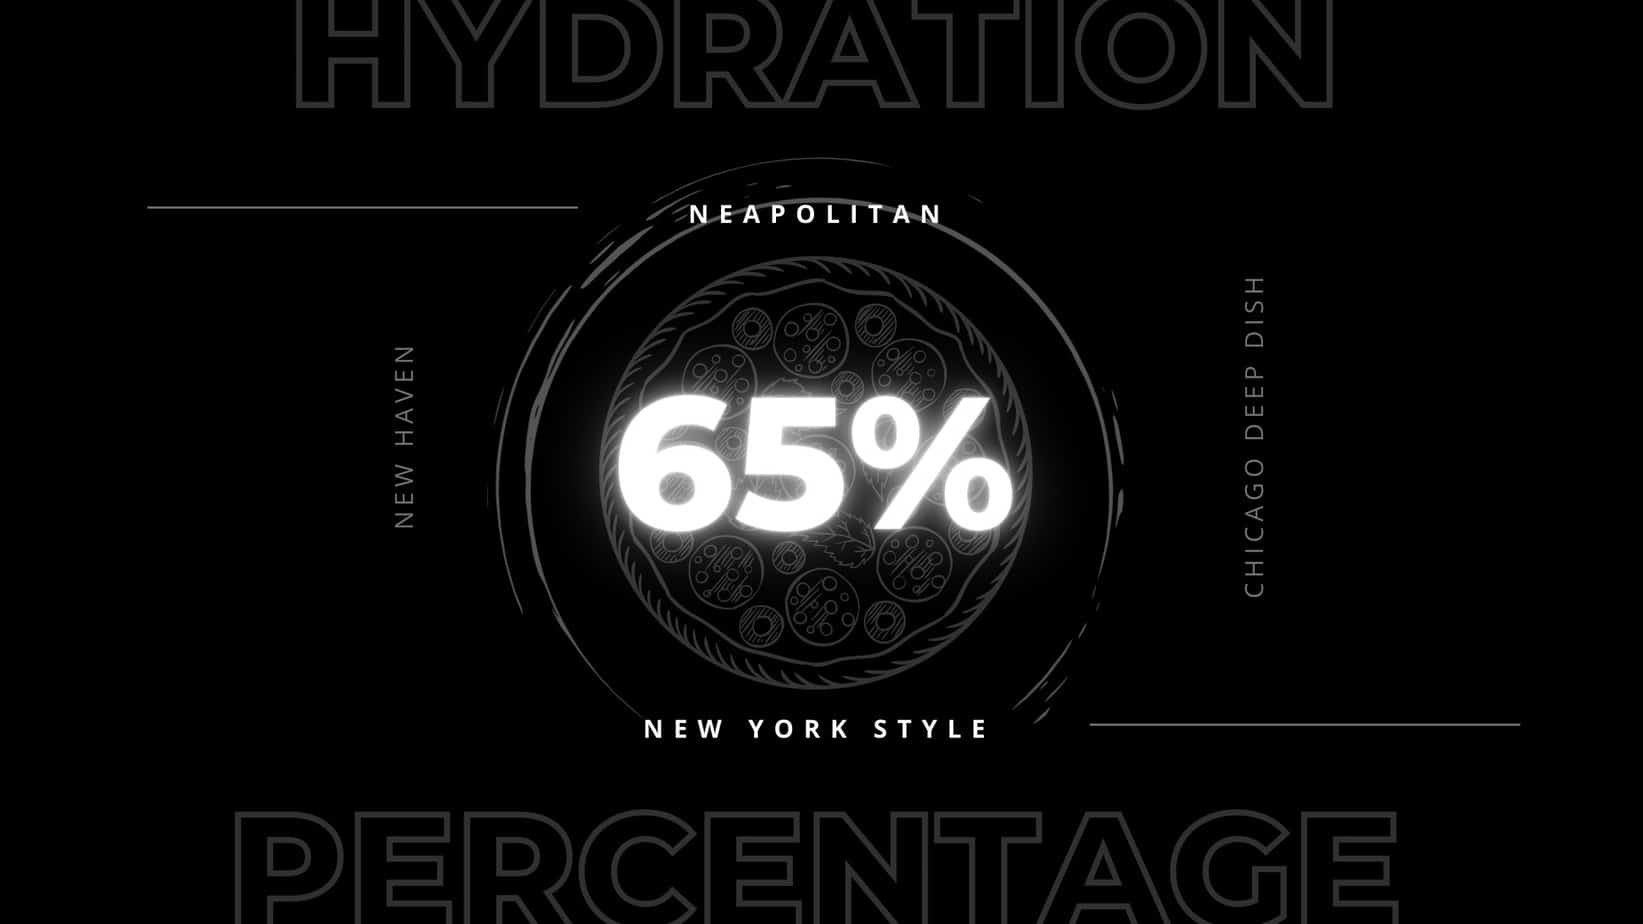 7 Hydration Percentages by Pizza Style that Actually Make the Best Pizza